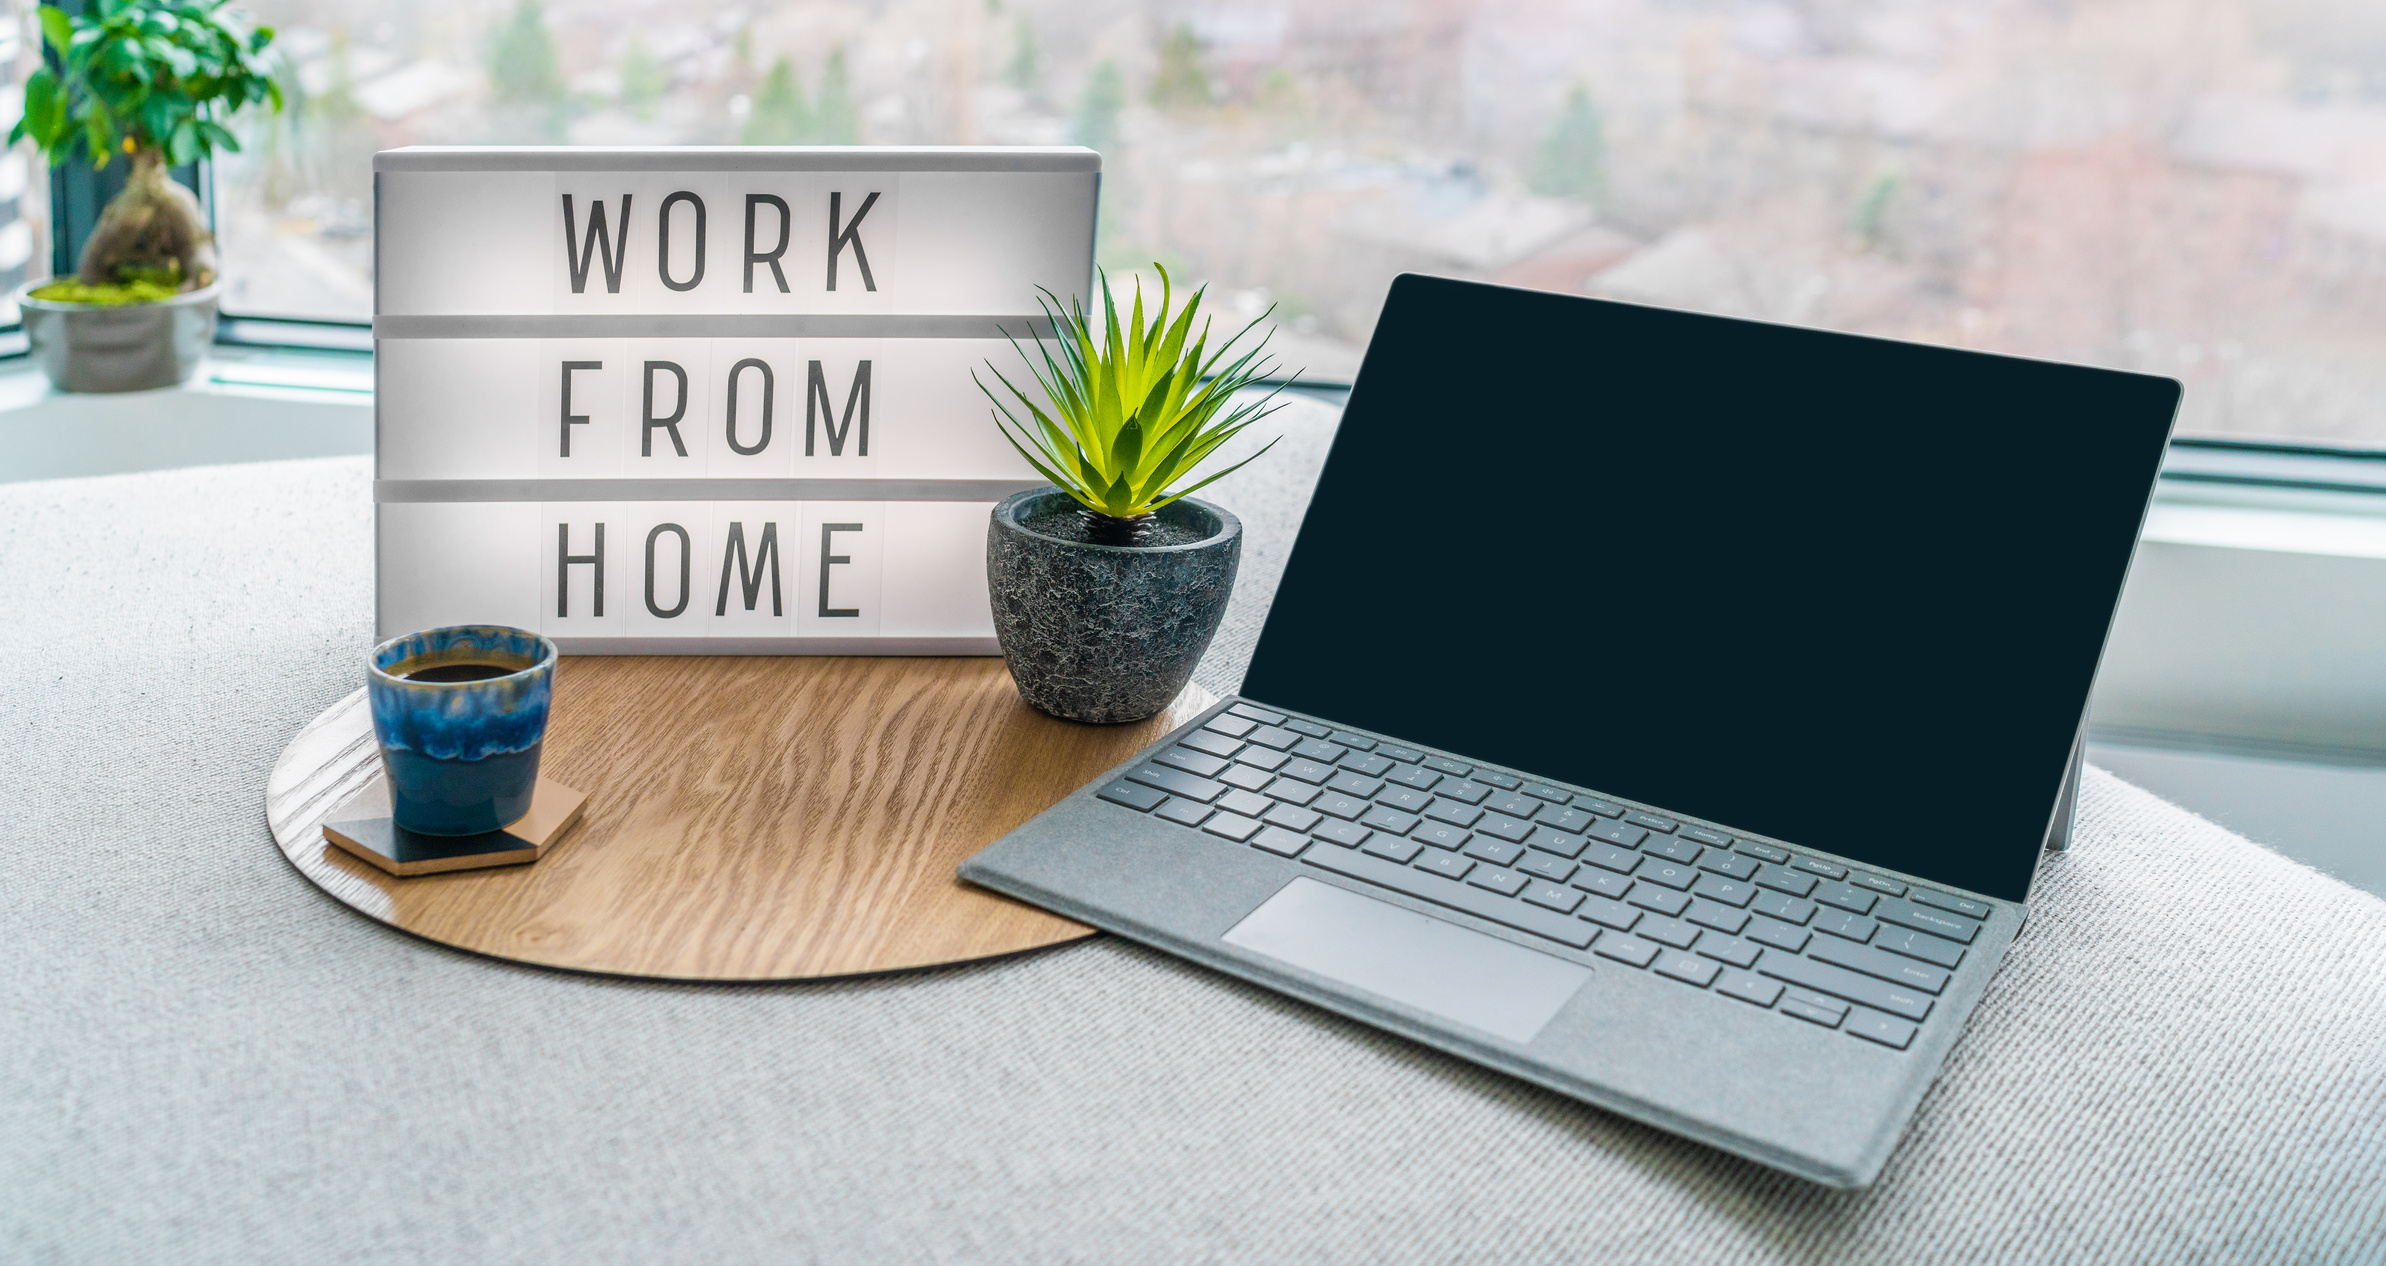 Work From Home Light Box and Laptop